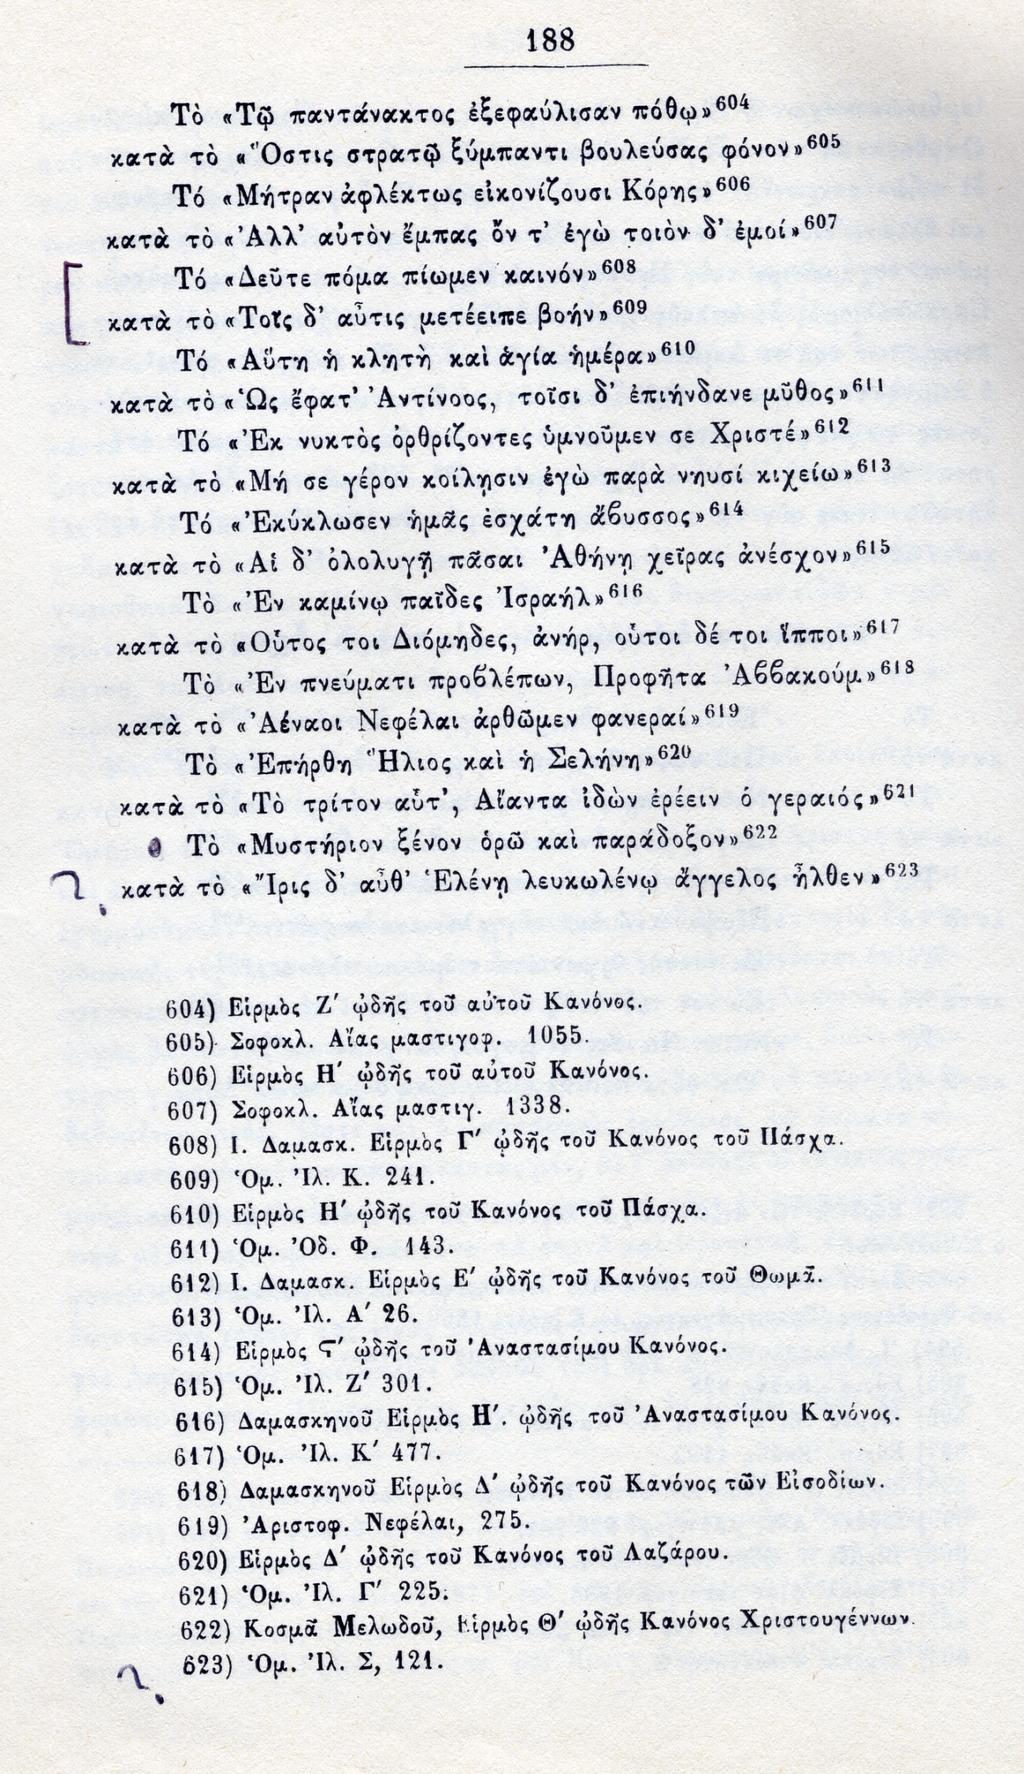 Proceedings of the 1st